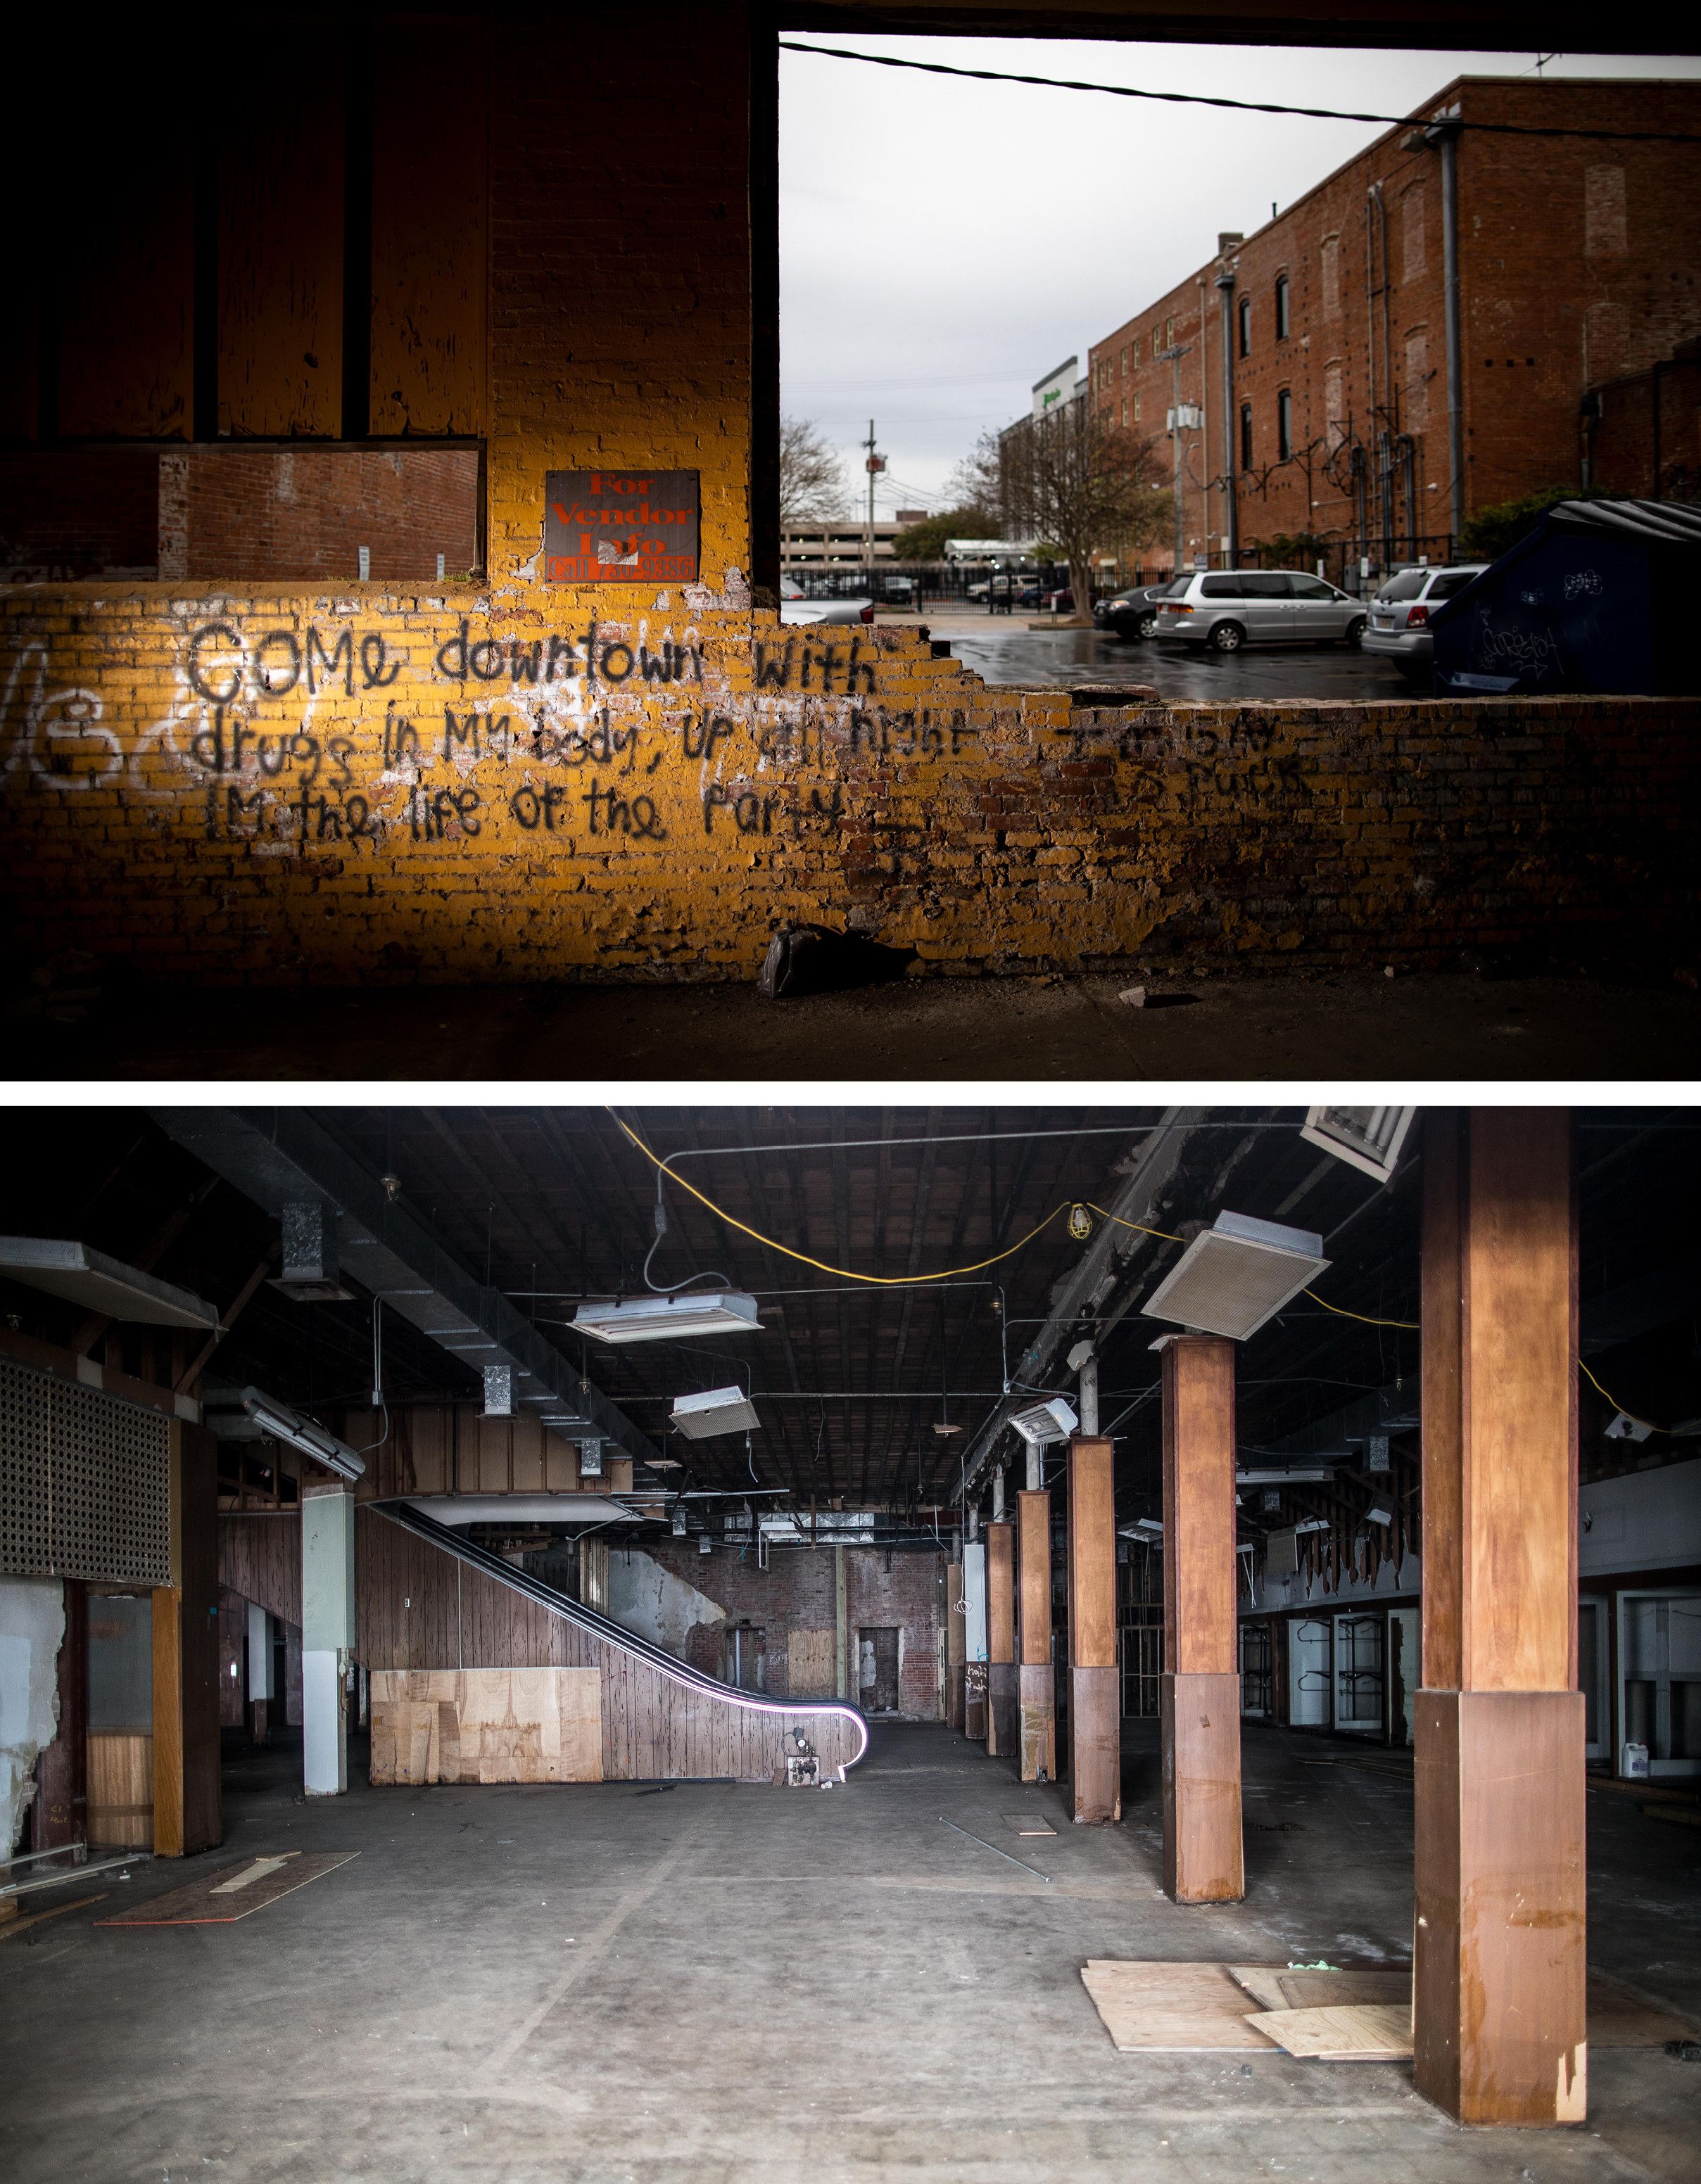 In the parish seat of Alexandria, a grand hotel converted from a 19th-century plantation house competes with abandoned storefronts, like the building above that has become a makeshift canvas for street artists and the old mall below. Image by M. Scott Mahaskey for Politico Magazine. Louisiana, 2019.